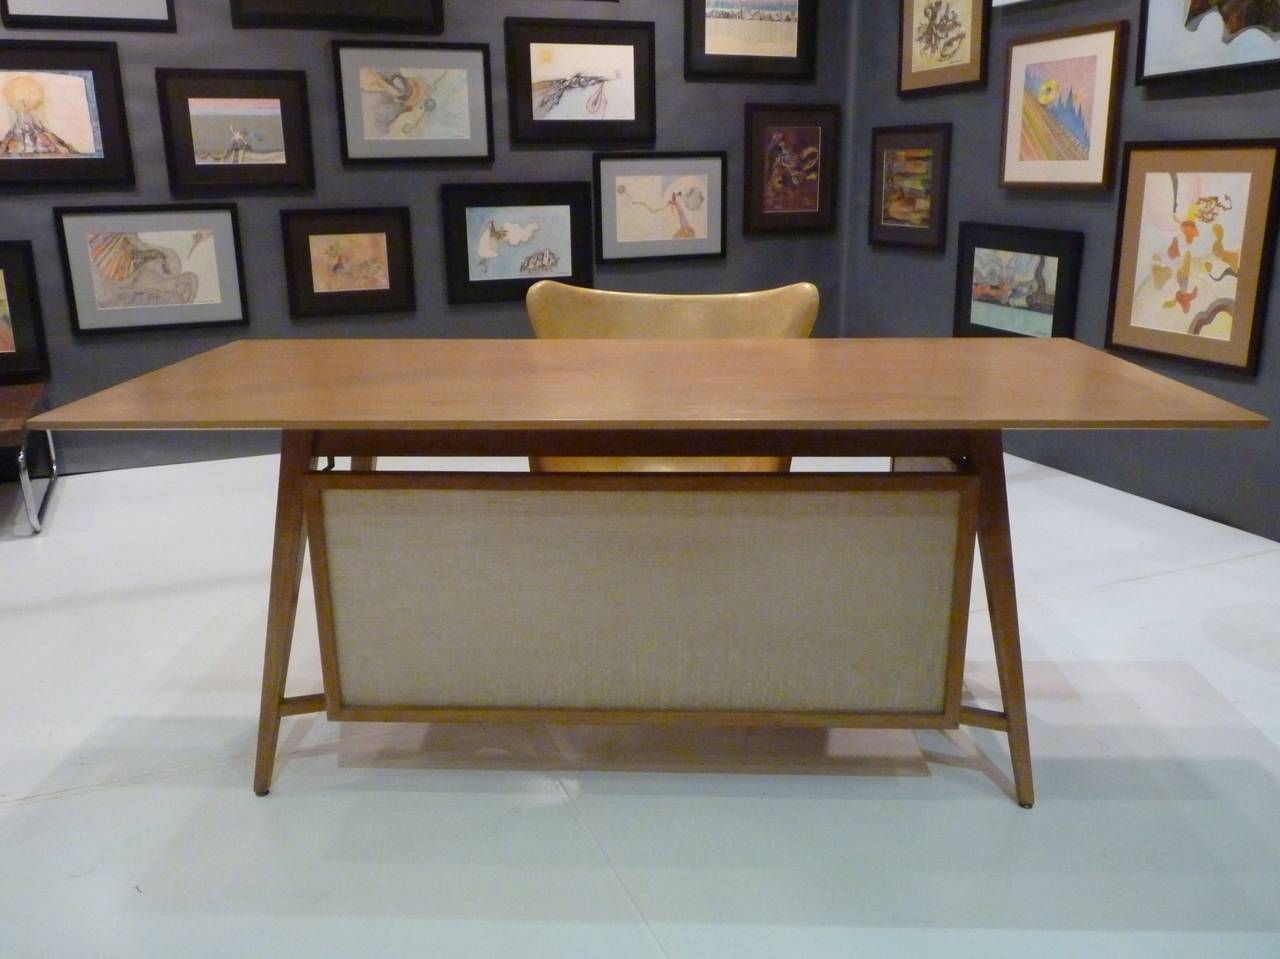 Custom California Modern desk, circa 1950s of bleached mahogany. Champagne finish and translucent screen make this a light and airy addition to any room. X-base is a great design touch and seldom seen in a desk. Asymmetrical privacy screen is on